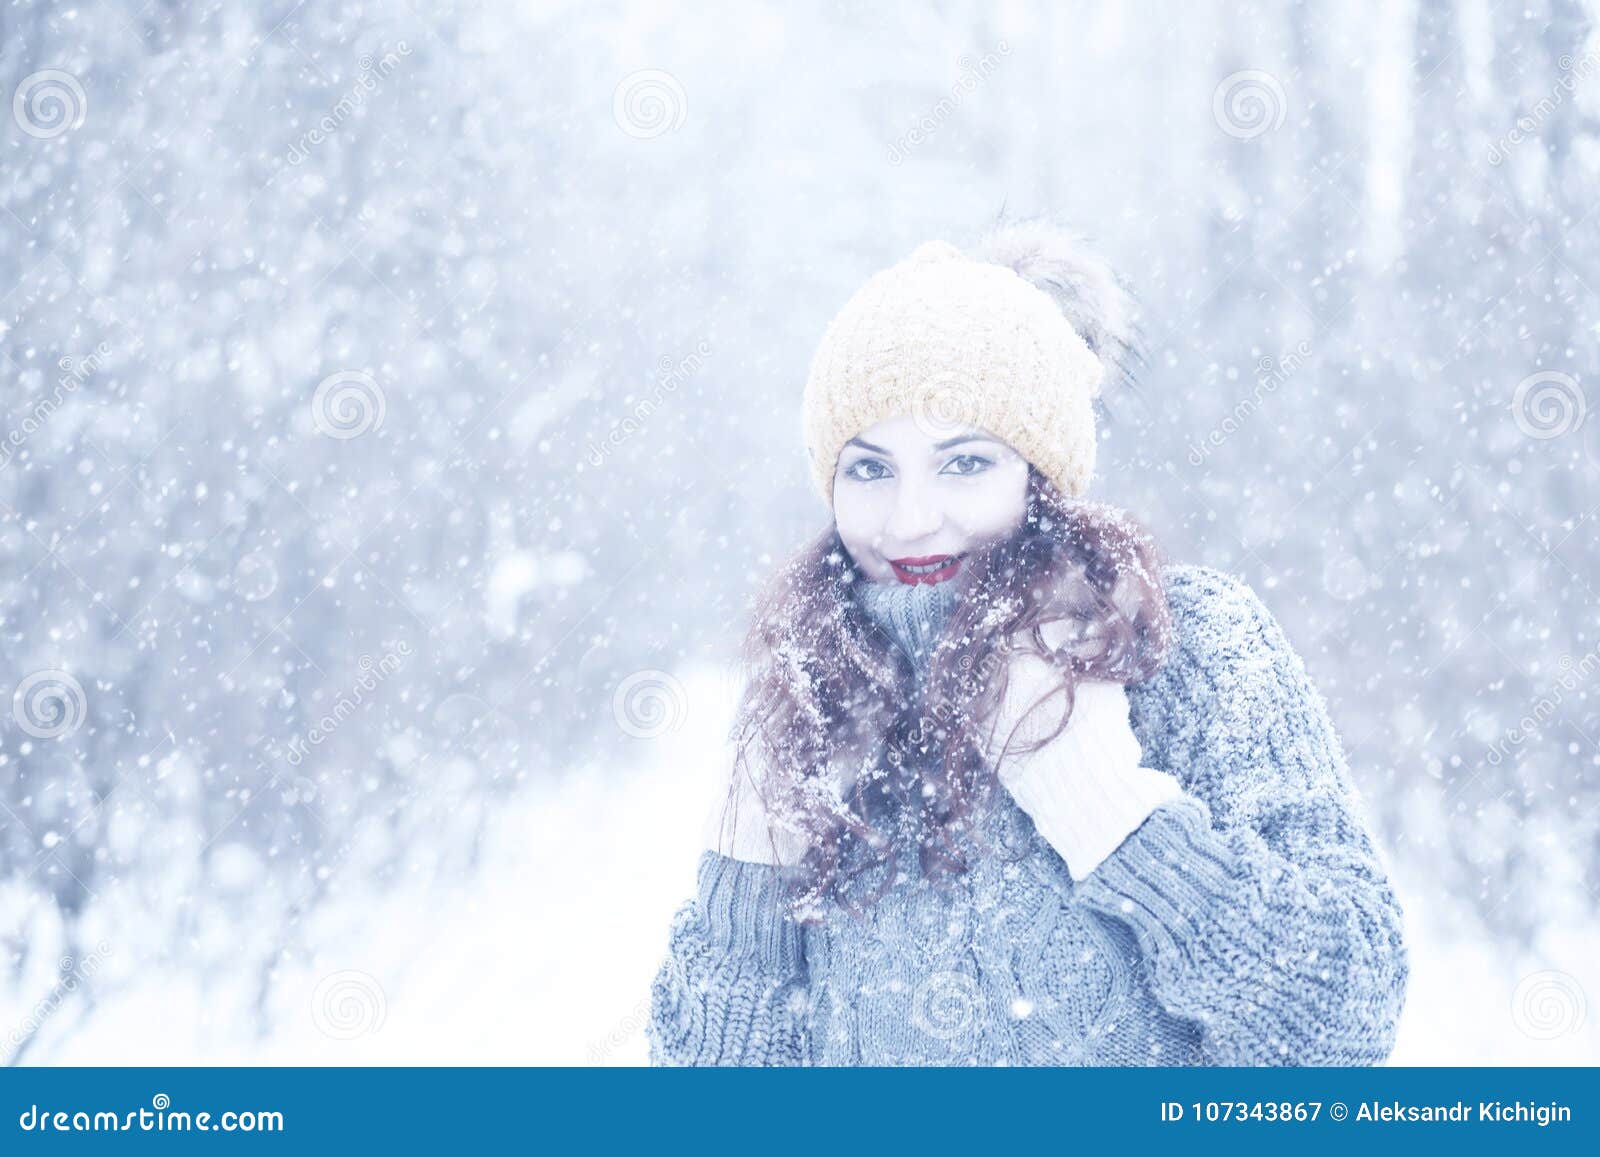 Beautiful Girl in a Beautiful Winter Snow Stock Image - Image of cold ...